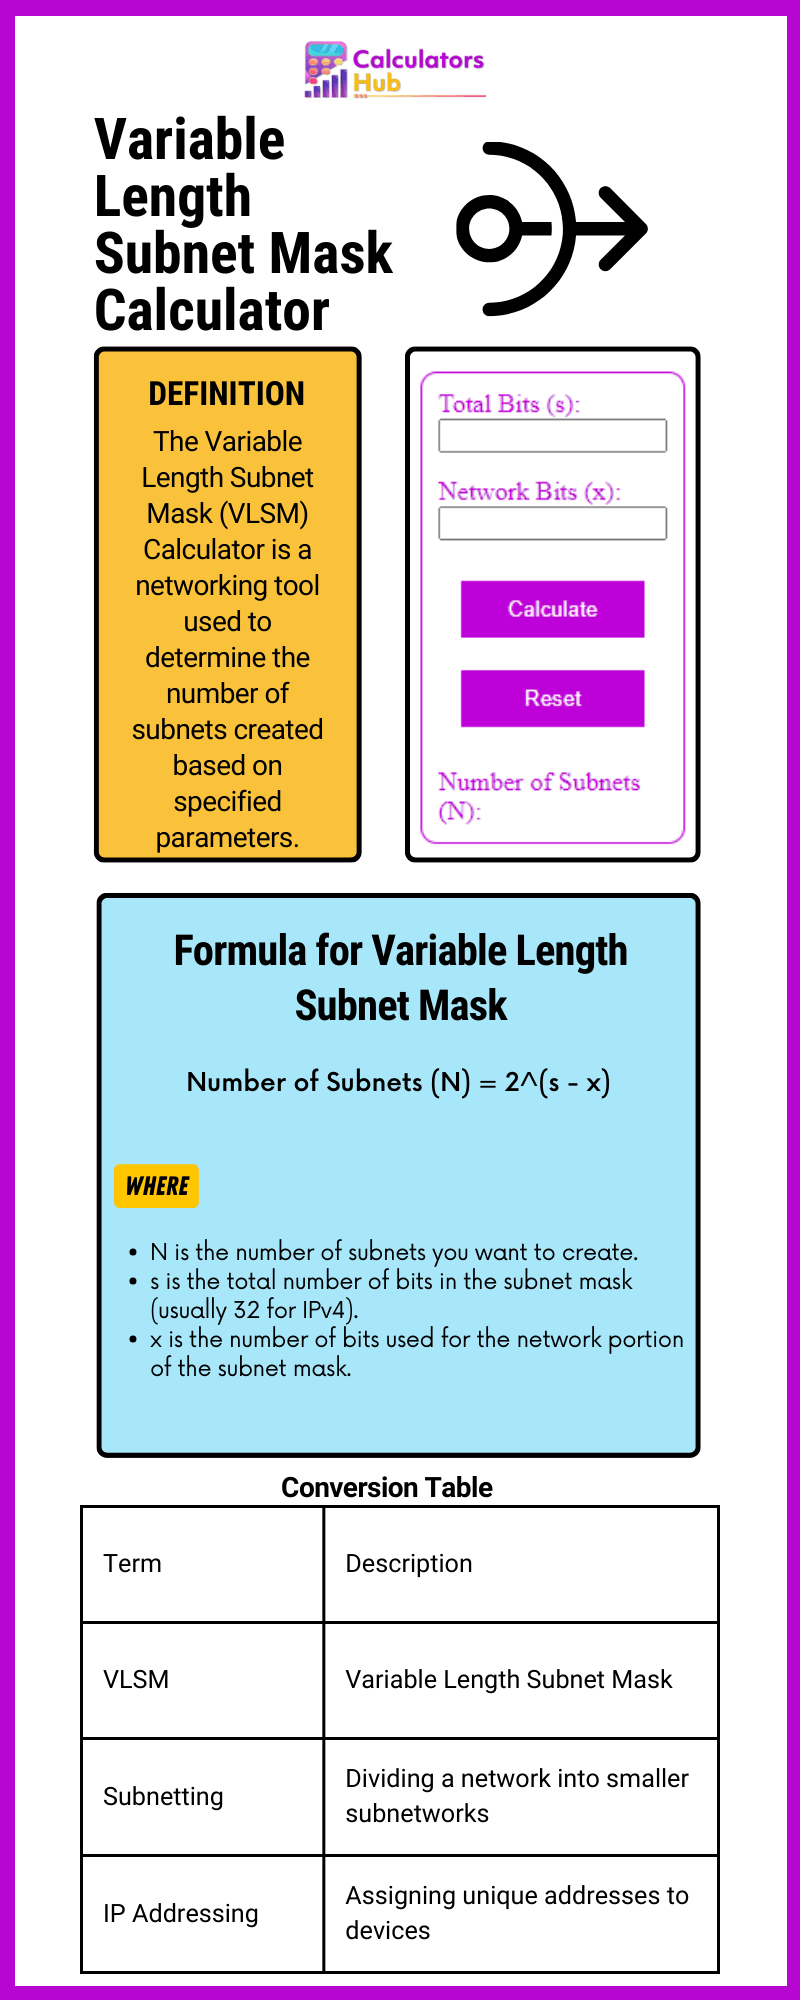 Variable Length Subnet Mask Calculator